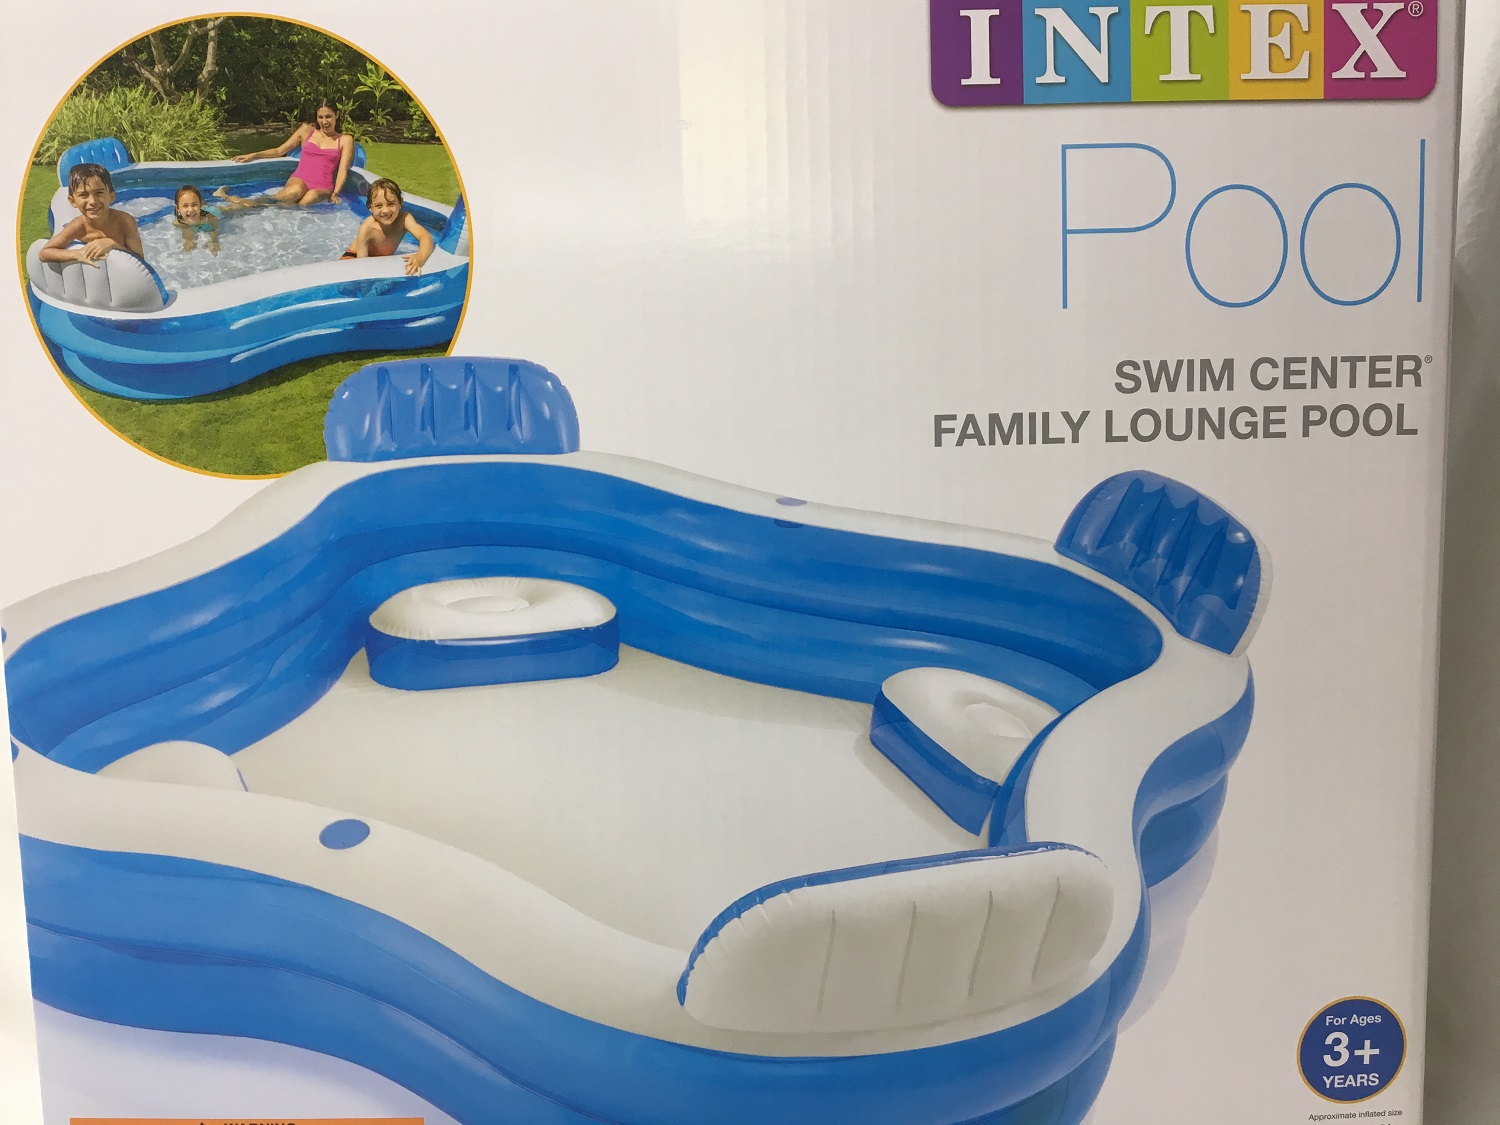 Intex Swim Center Family Lounge Inflatable Pool, 90" X 90" X 26" Ages 3+ - image 4 of 5